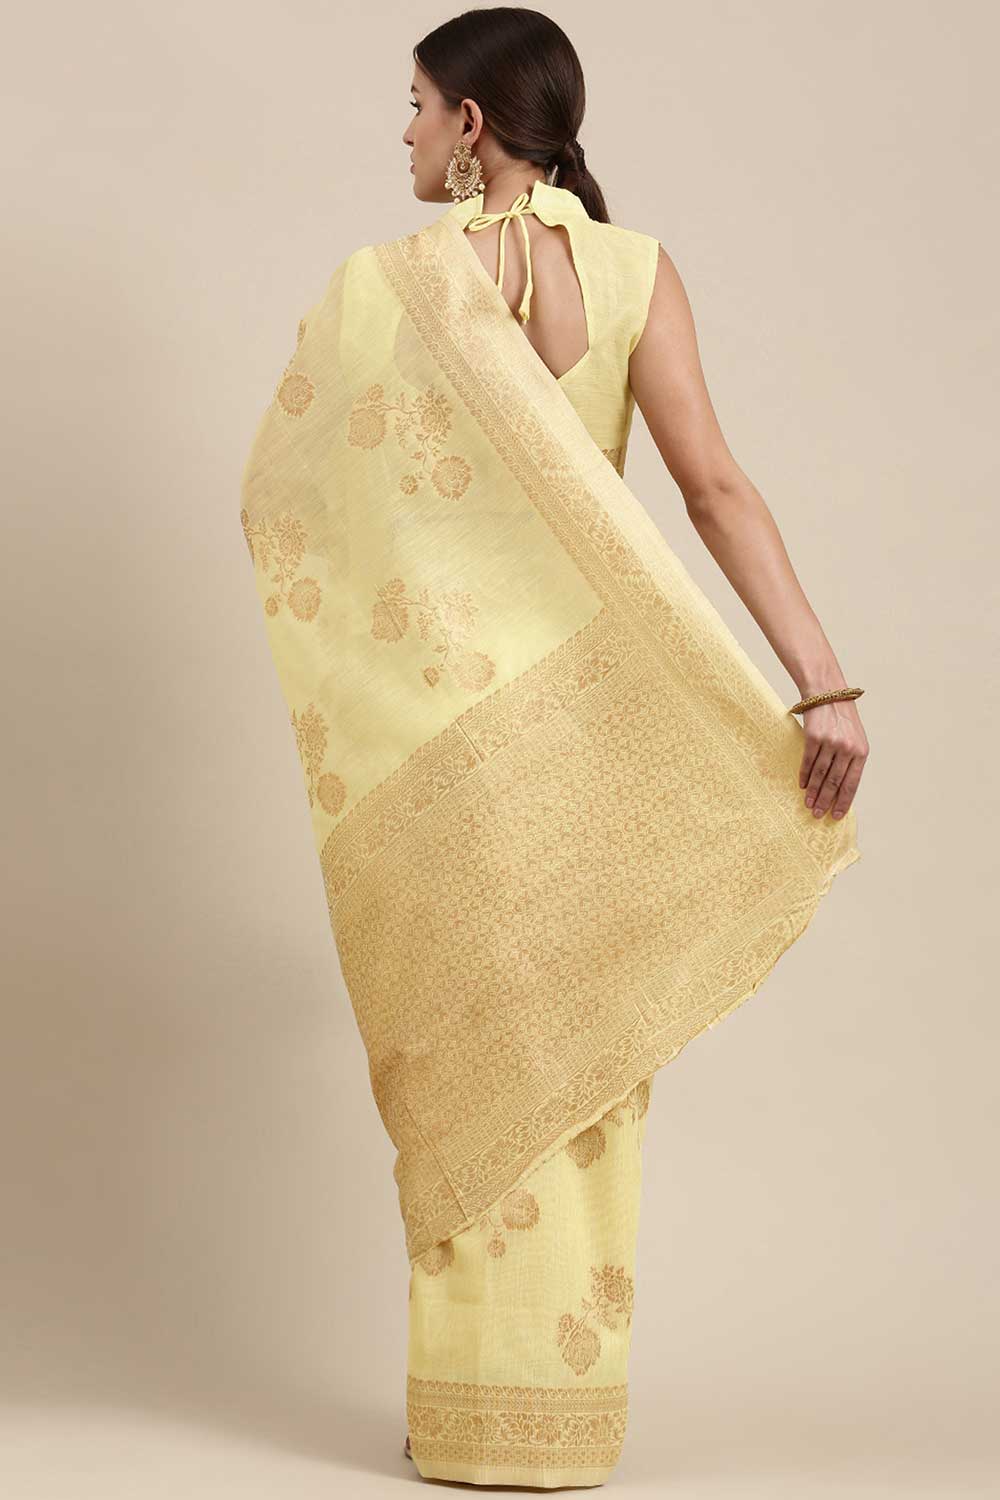 Shop Lori Lemon Yellow Floral Woven Blended Linen One Minute Saree at best offer at our  Store - One Minute Saree